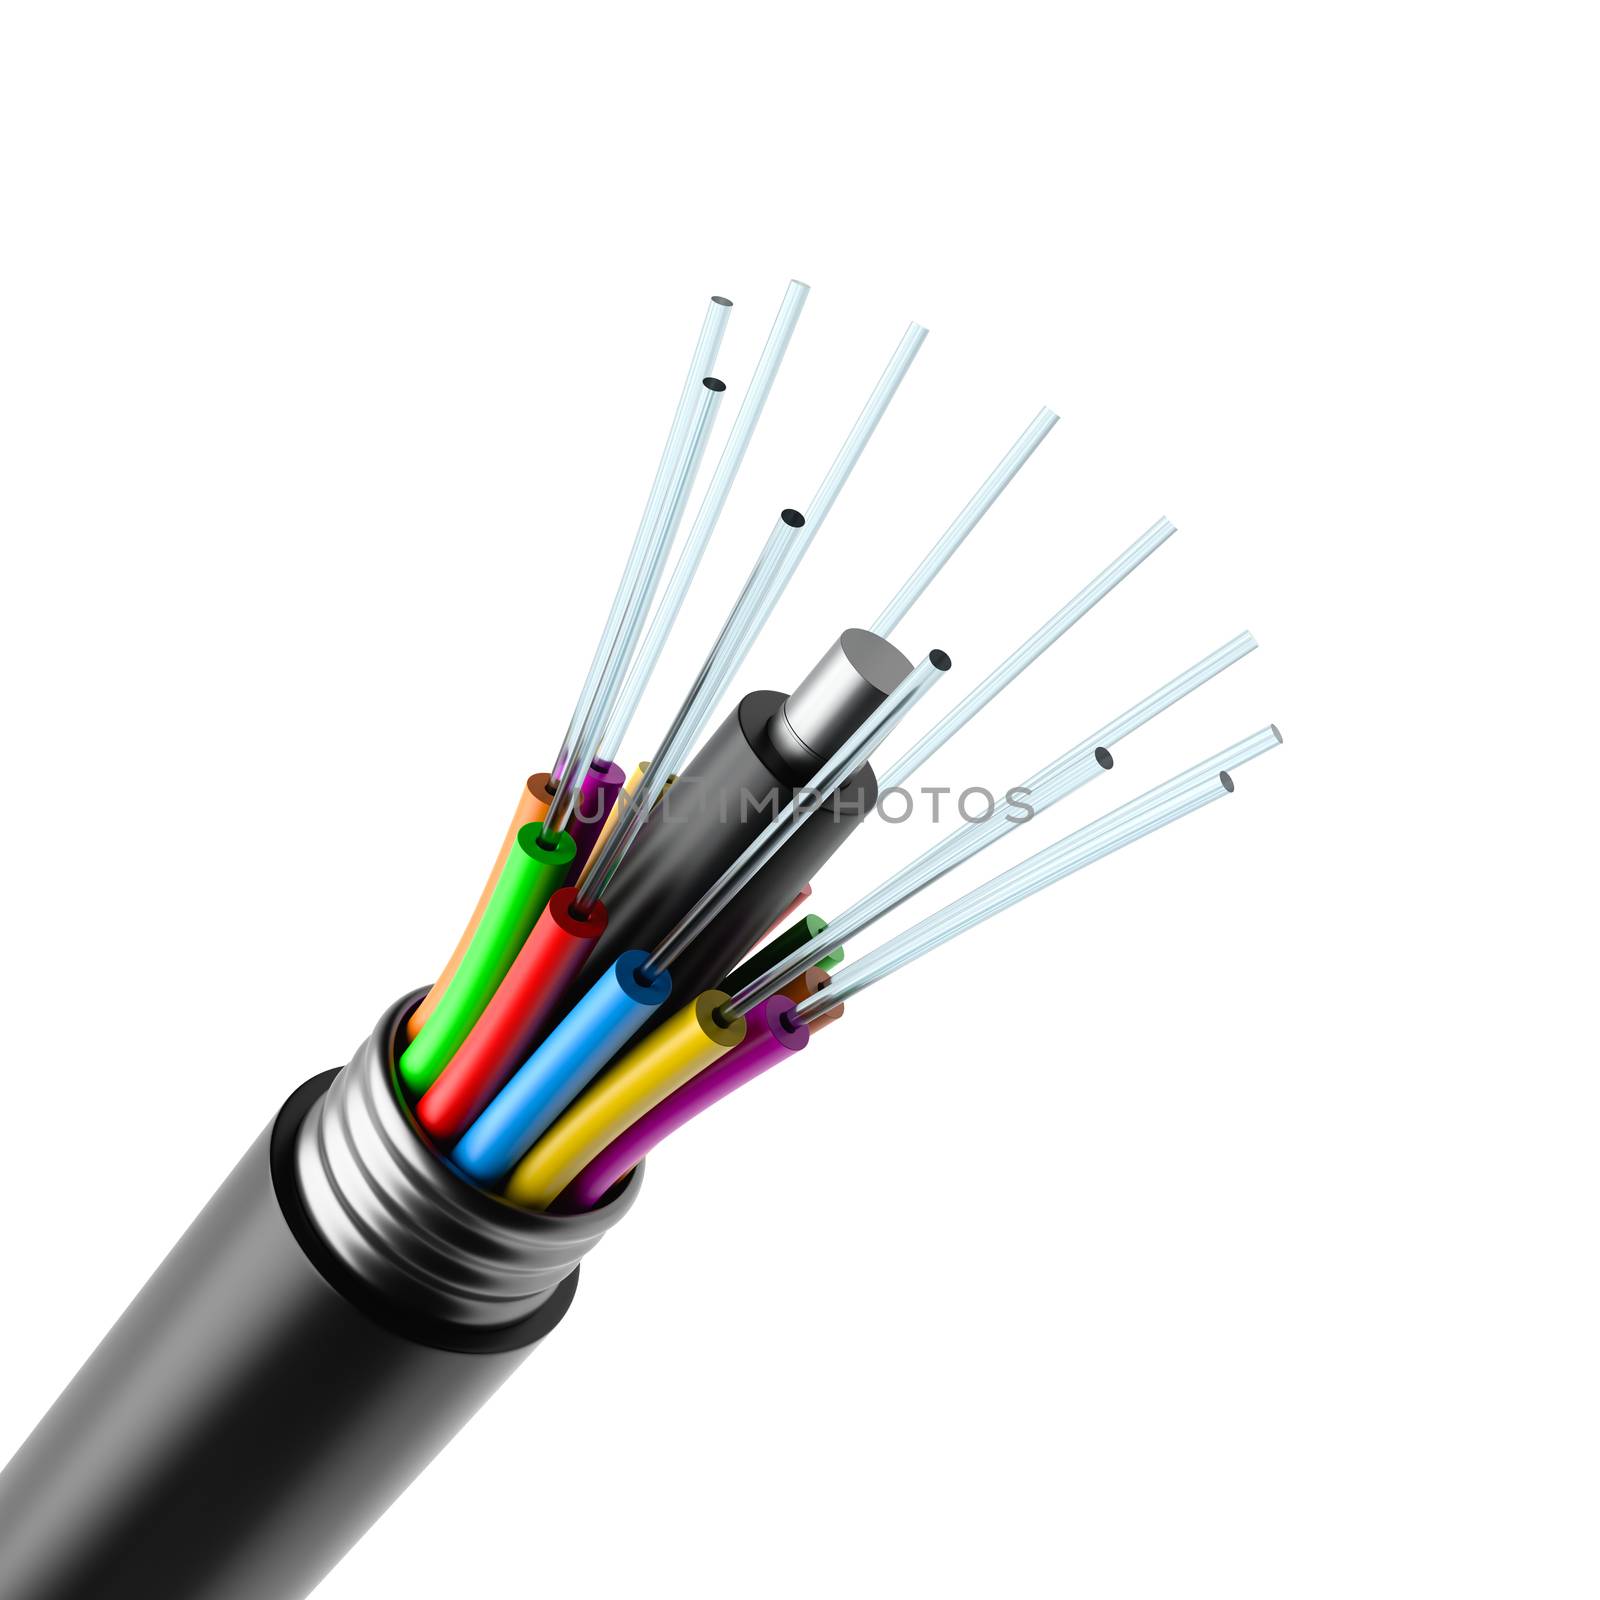 Optic Fiber Cable Isolated on White Background 3D Illustration